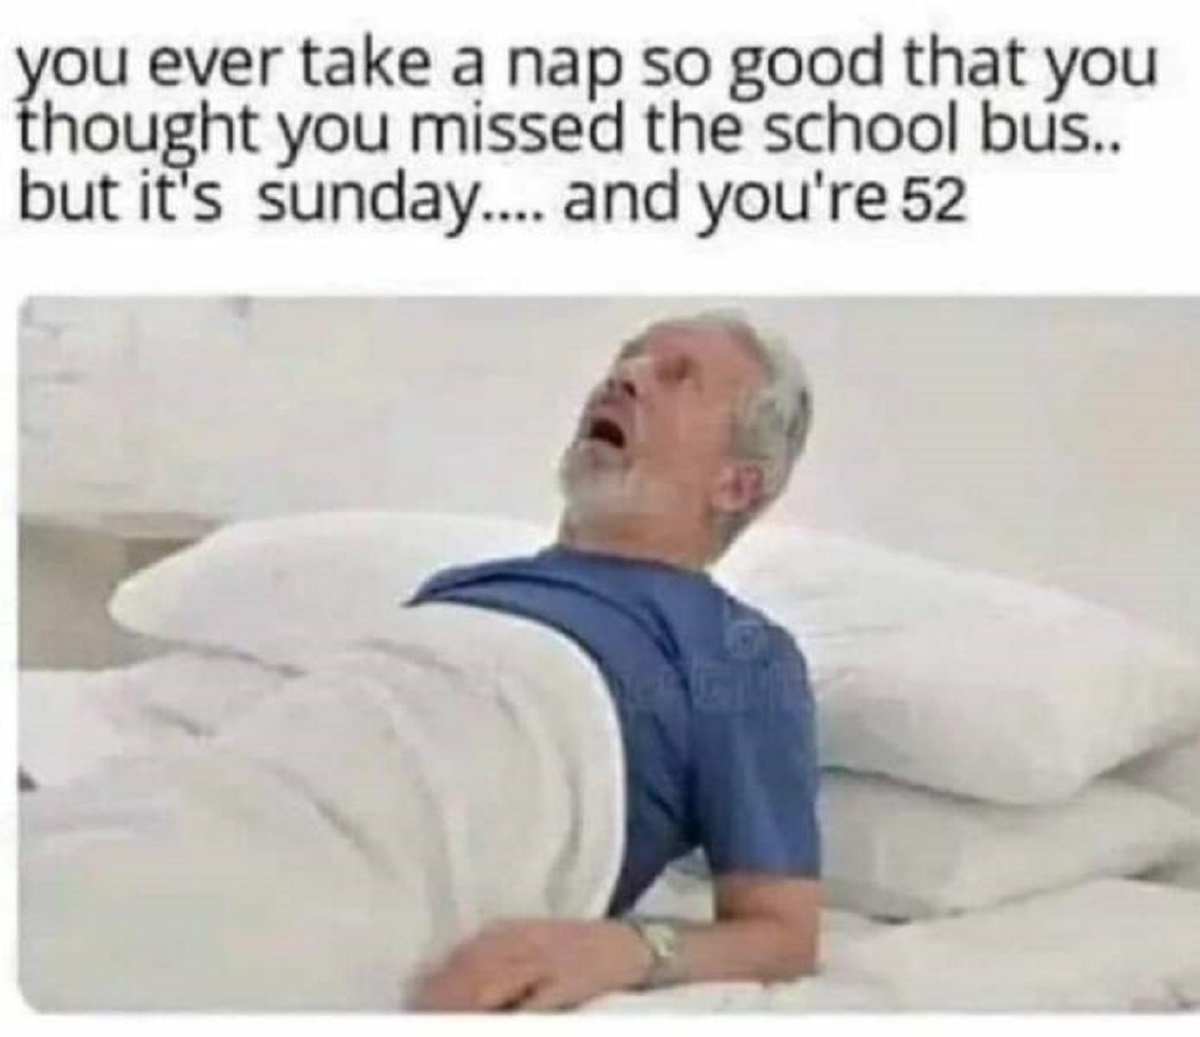 you sleep so hard meme - you ever take a nap so good that you thought you missed the school bus.. but it's sunday.... and you're 52